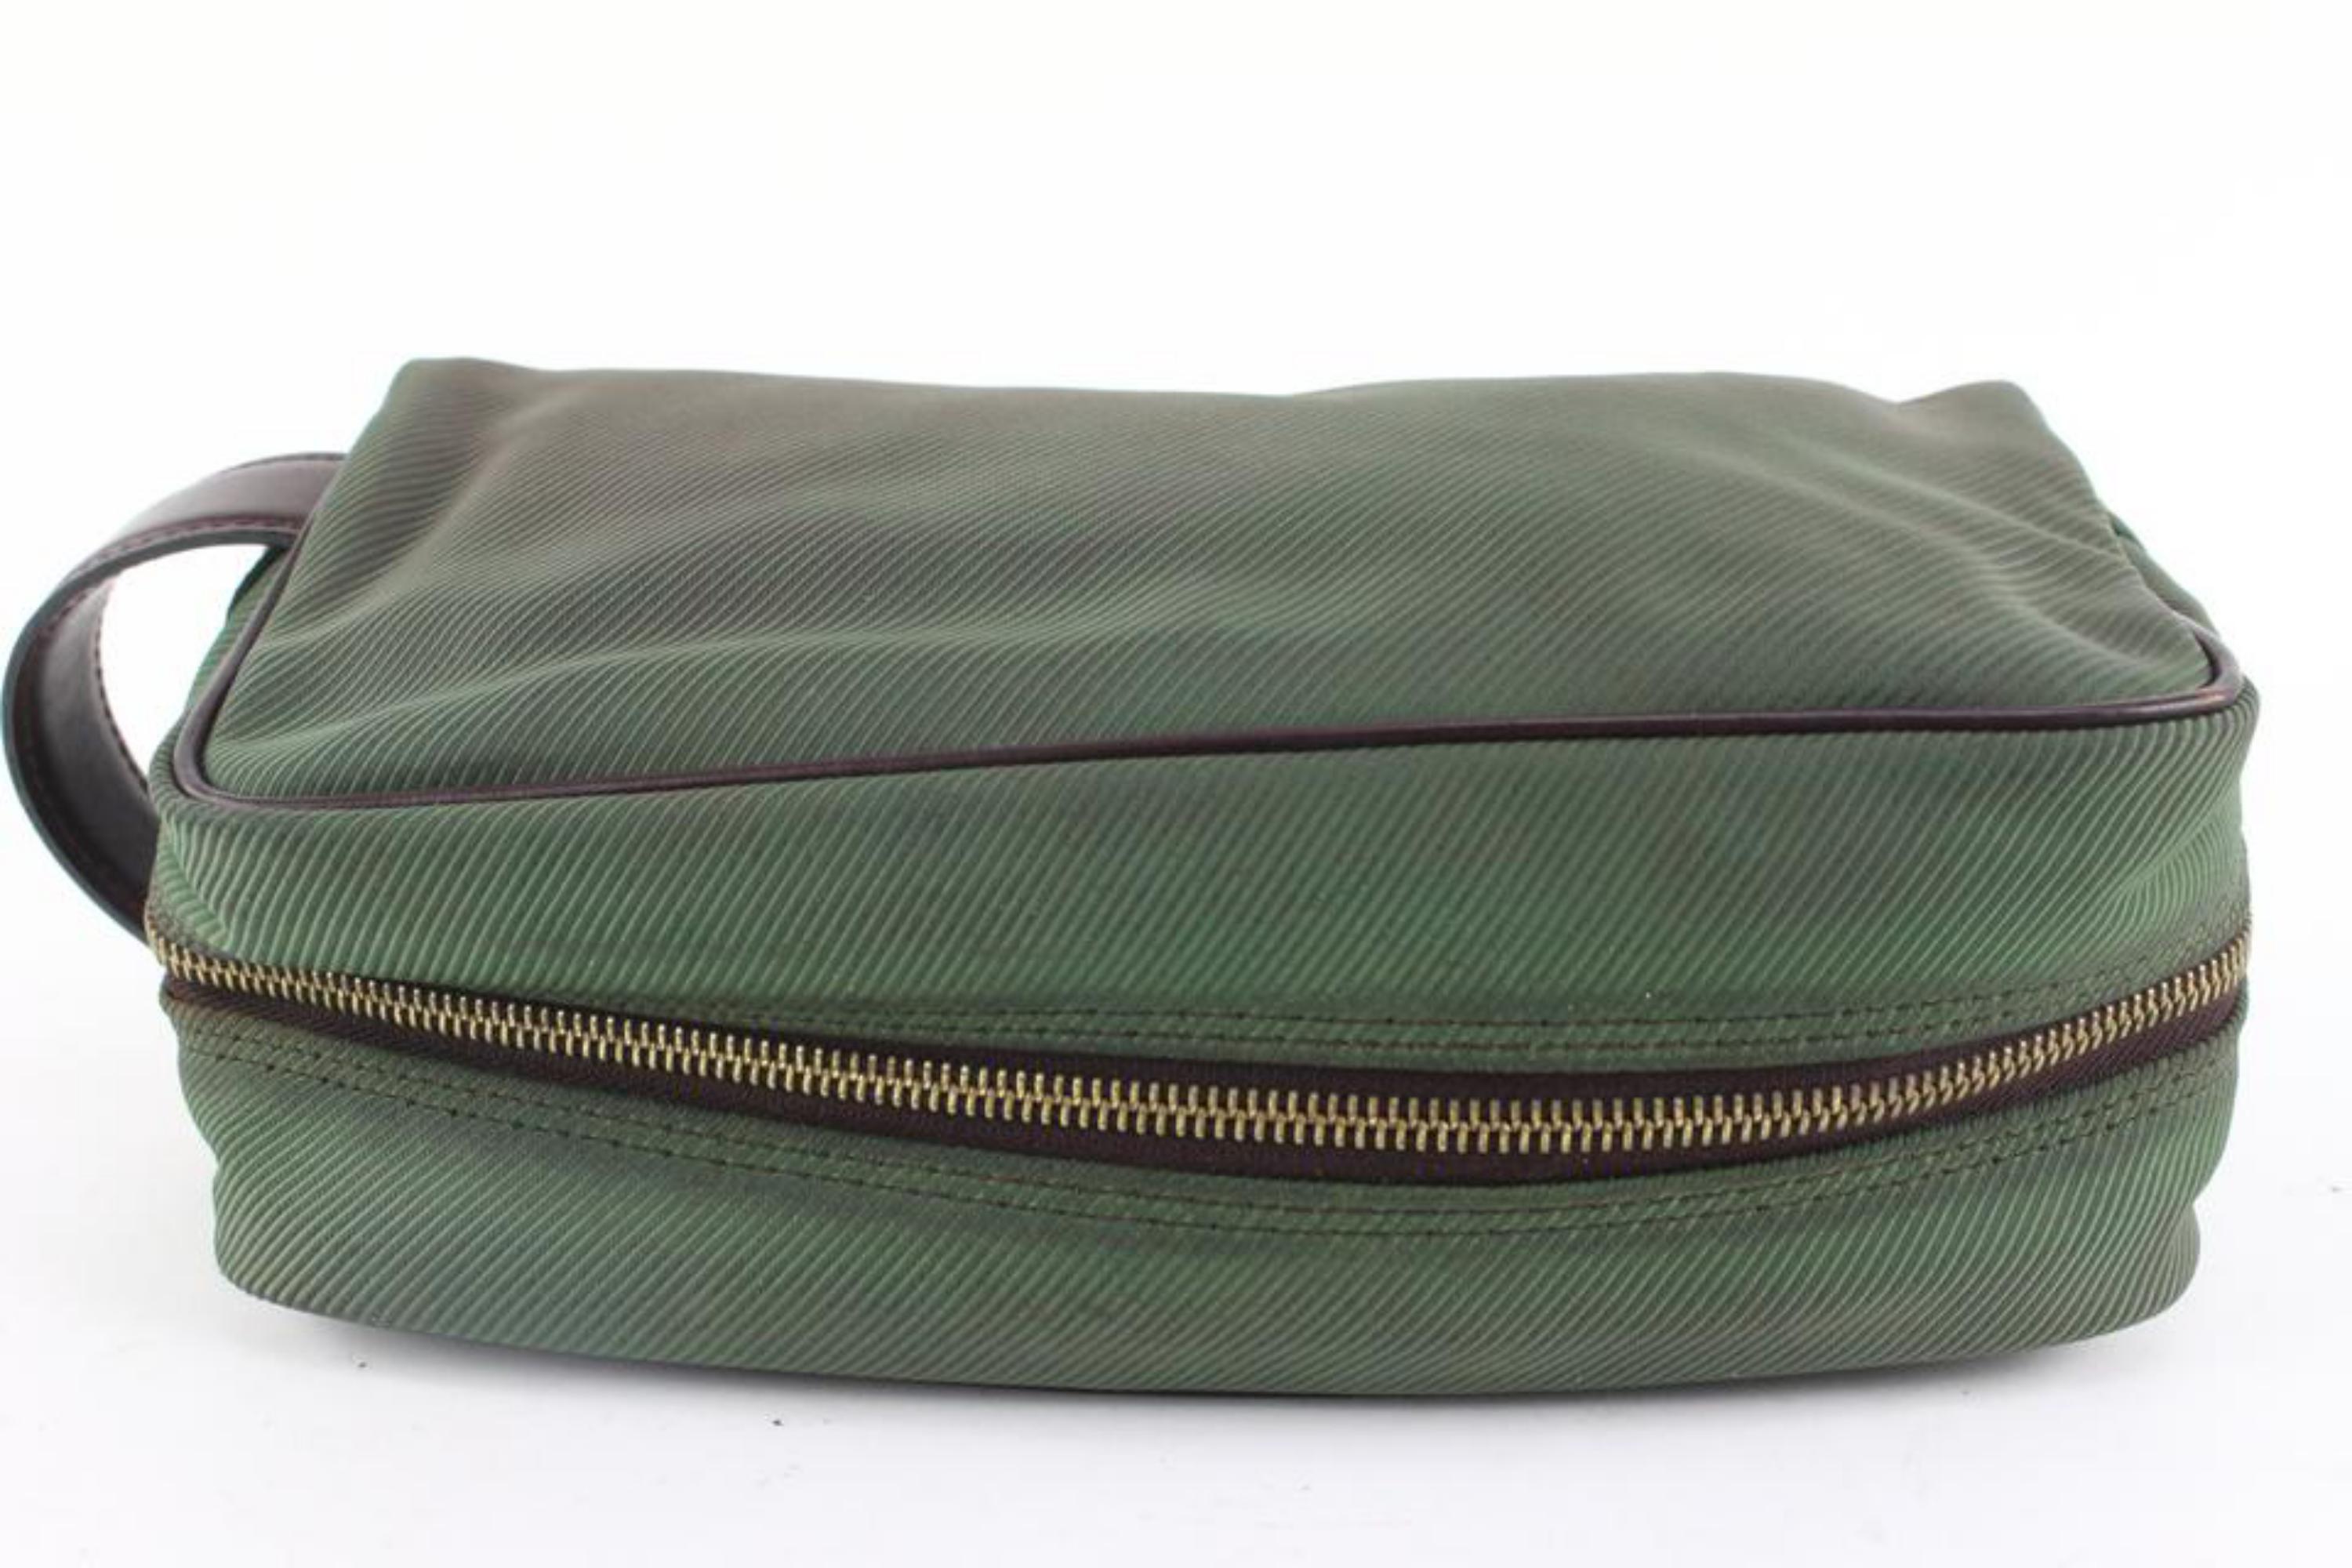 Louis Vuitton Green Palana Trousse Cosmetic Pouch Make Up Toiletry Case 1224lv29 For Sale 6